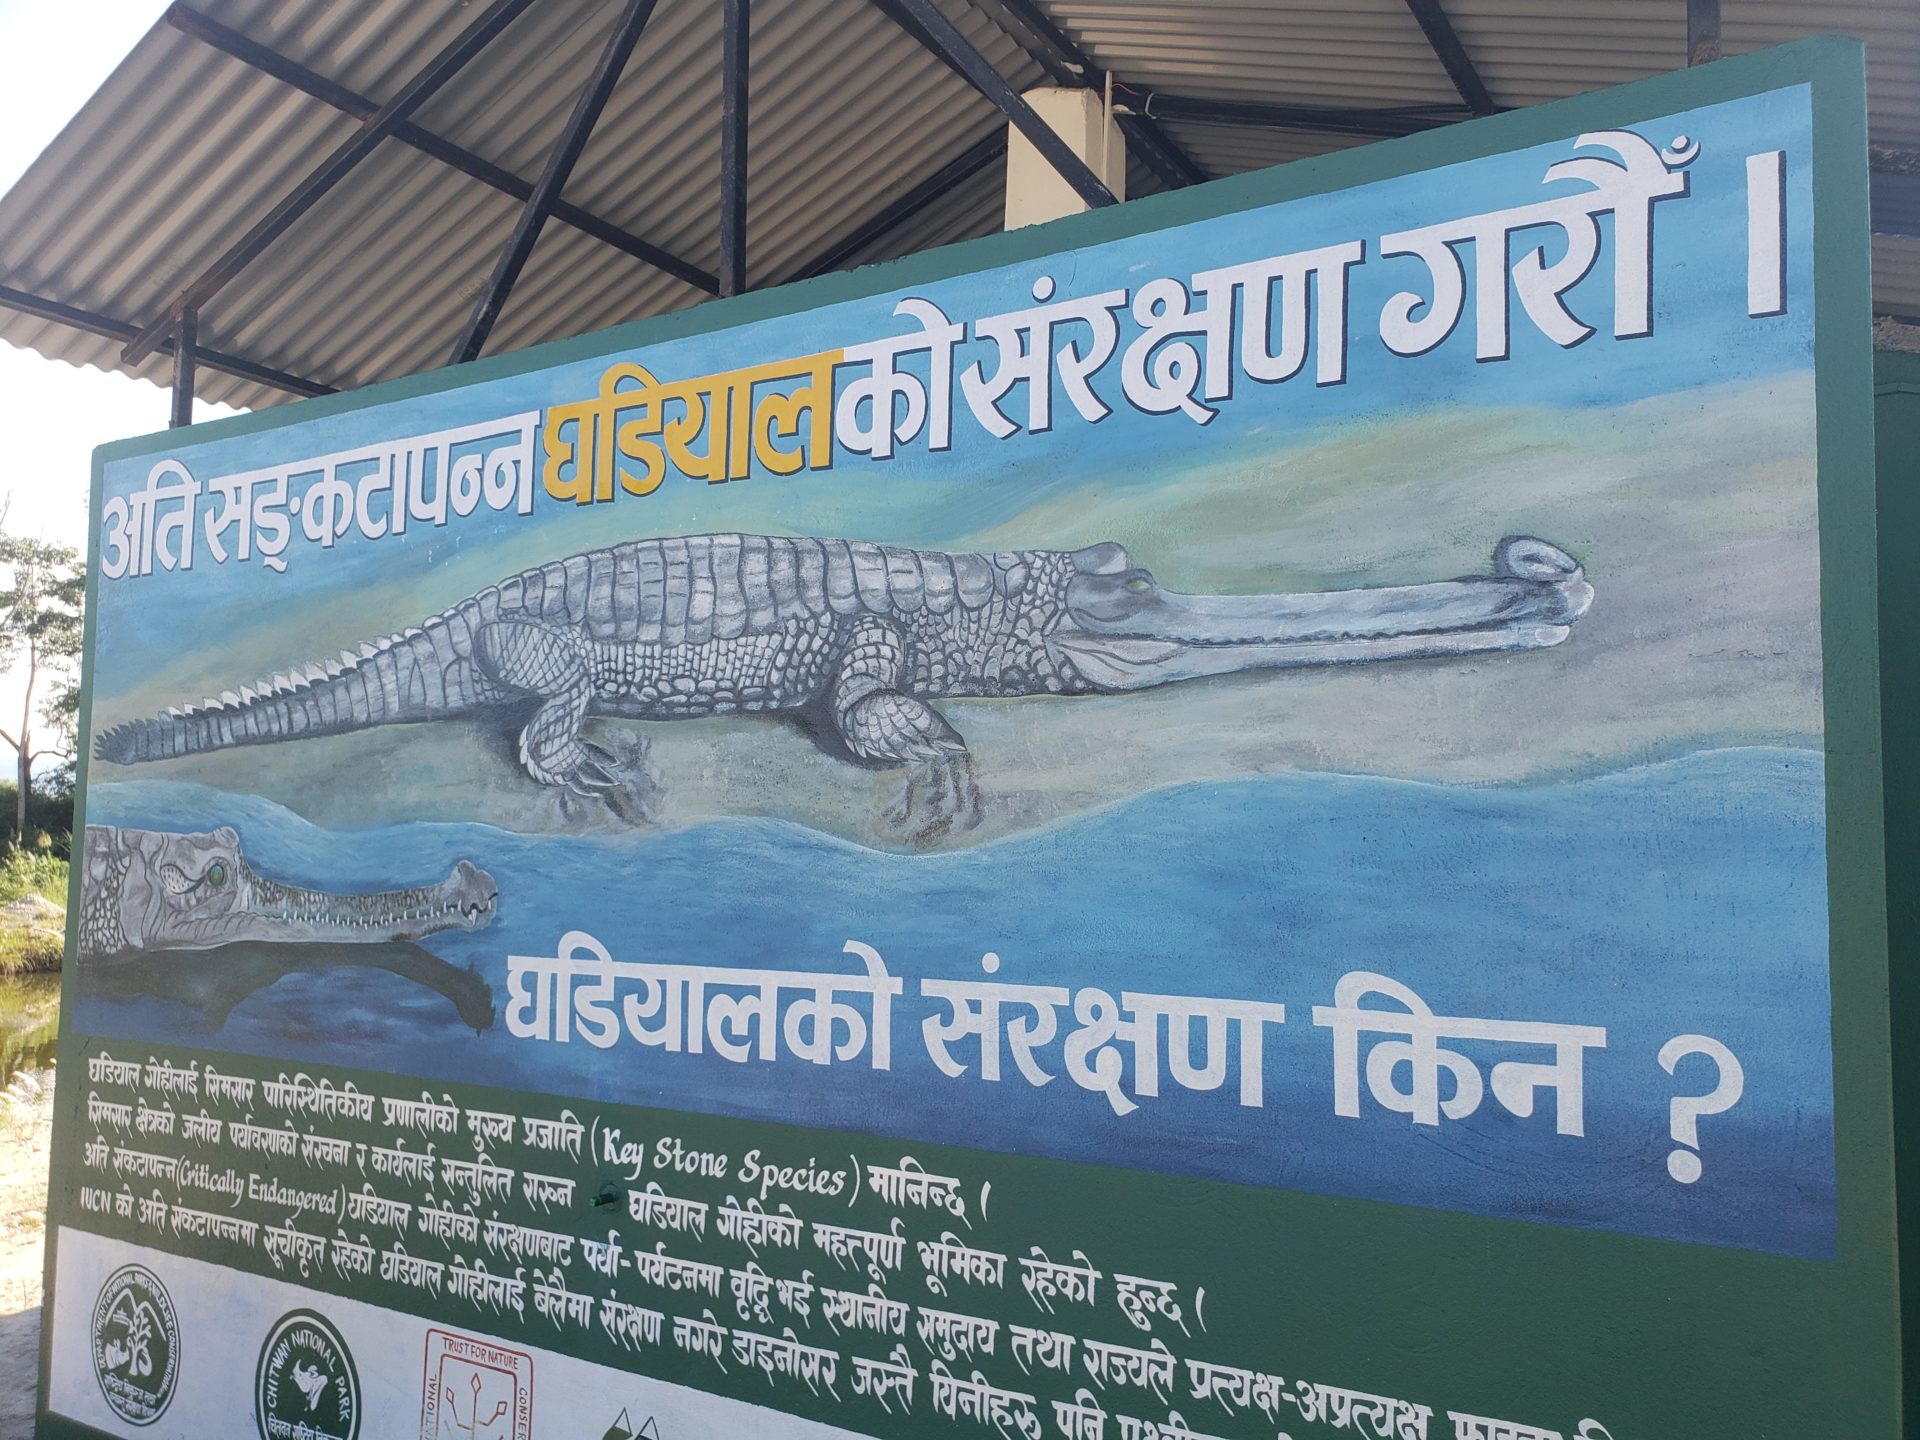 a sign with a crocodile and a crocodile in the water